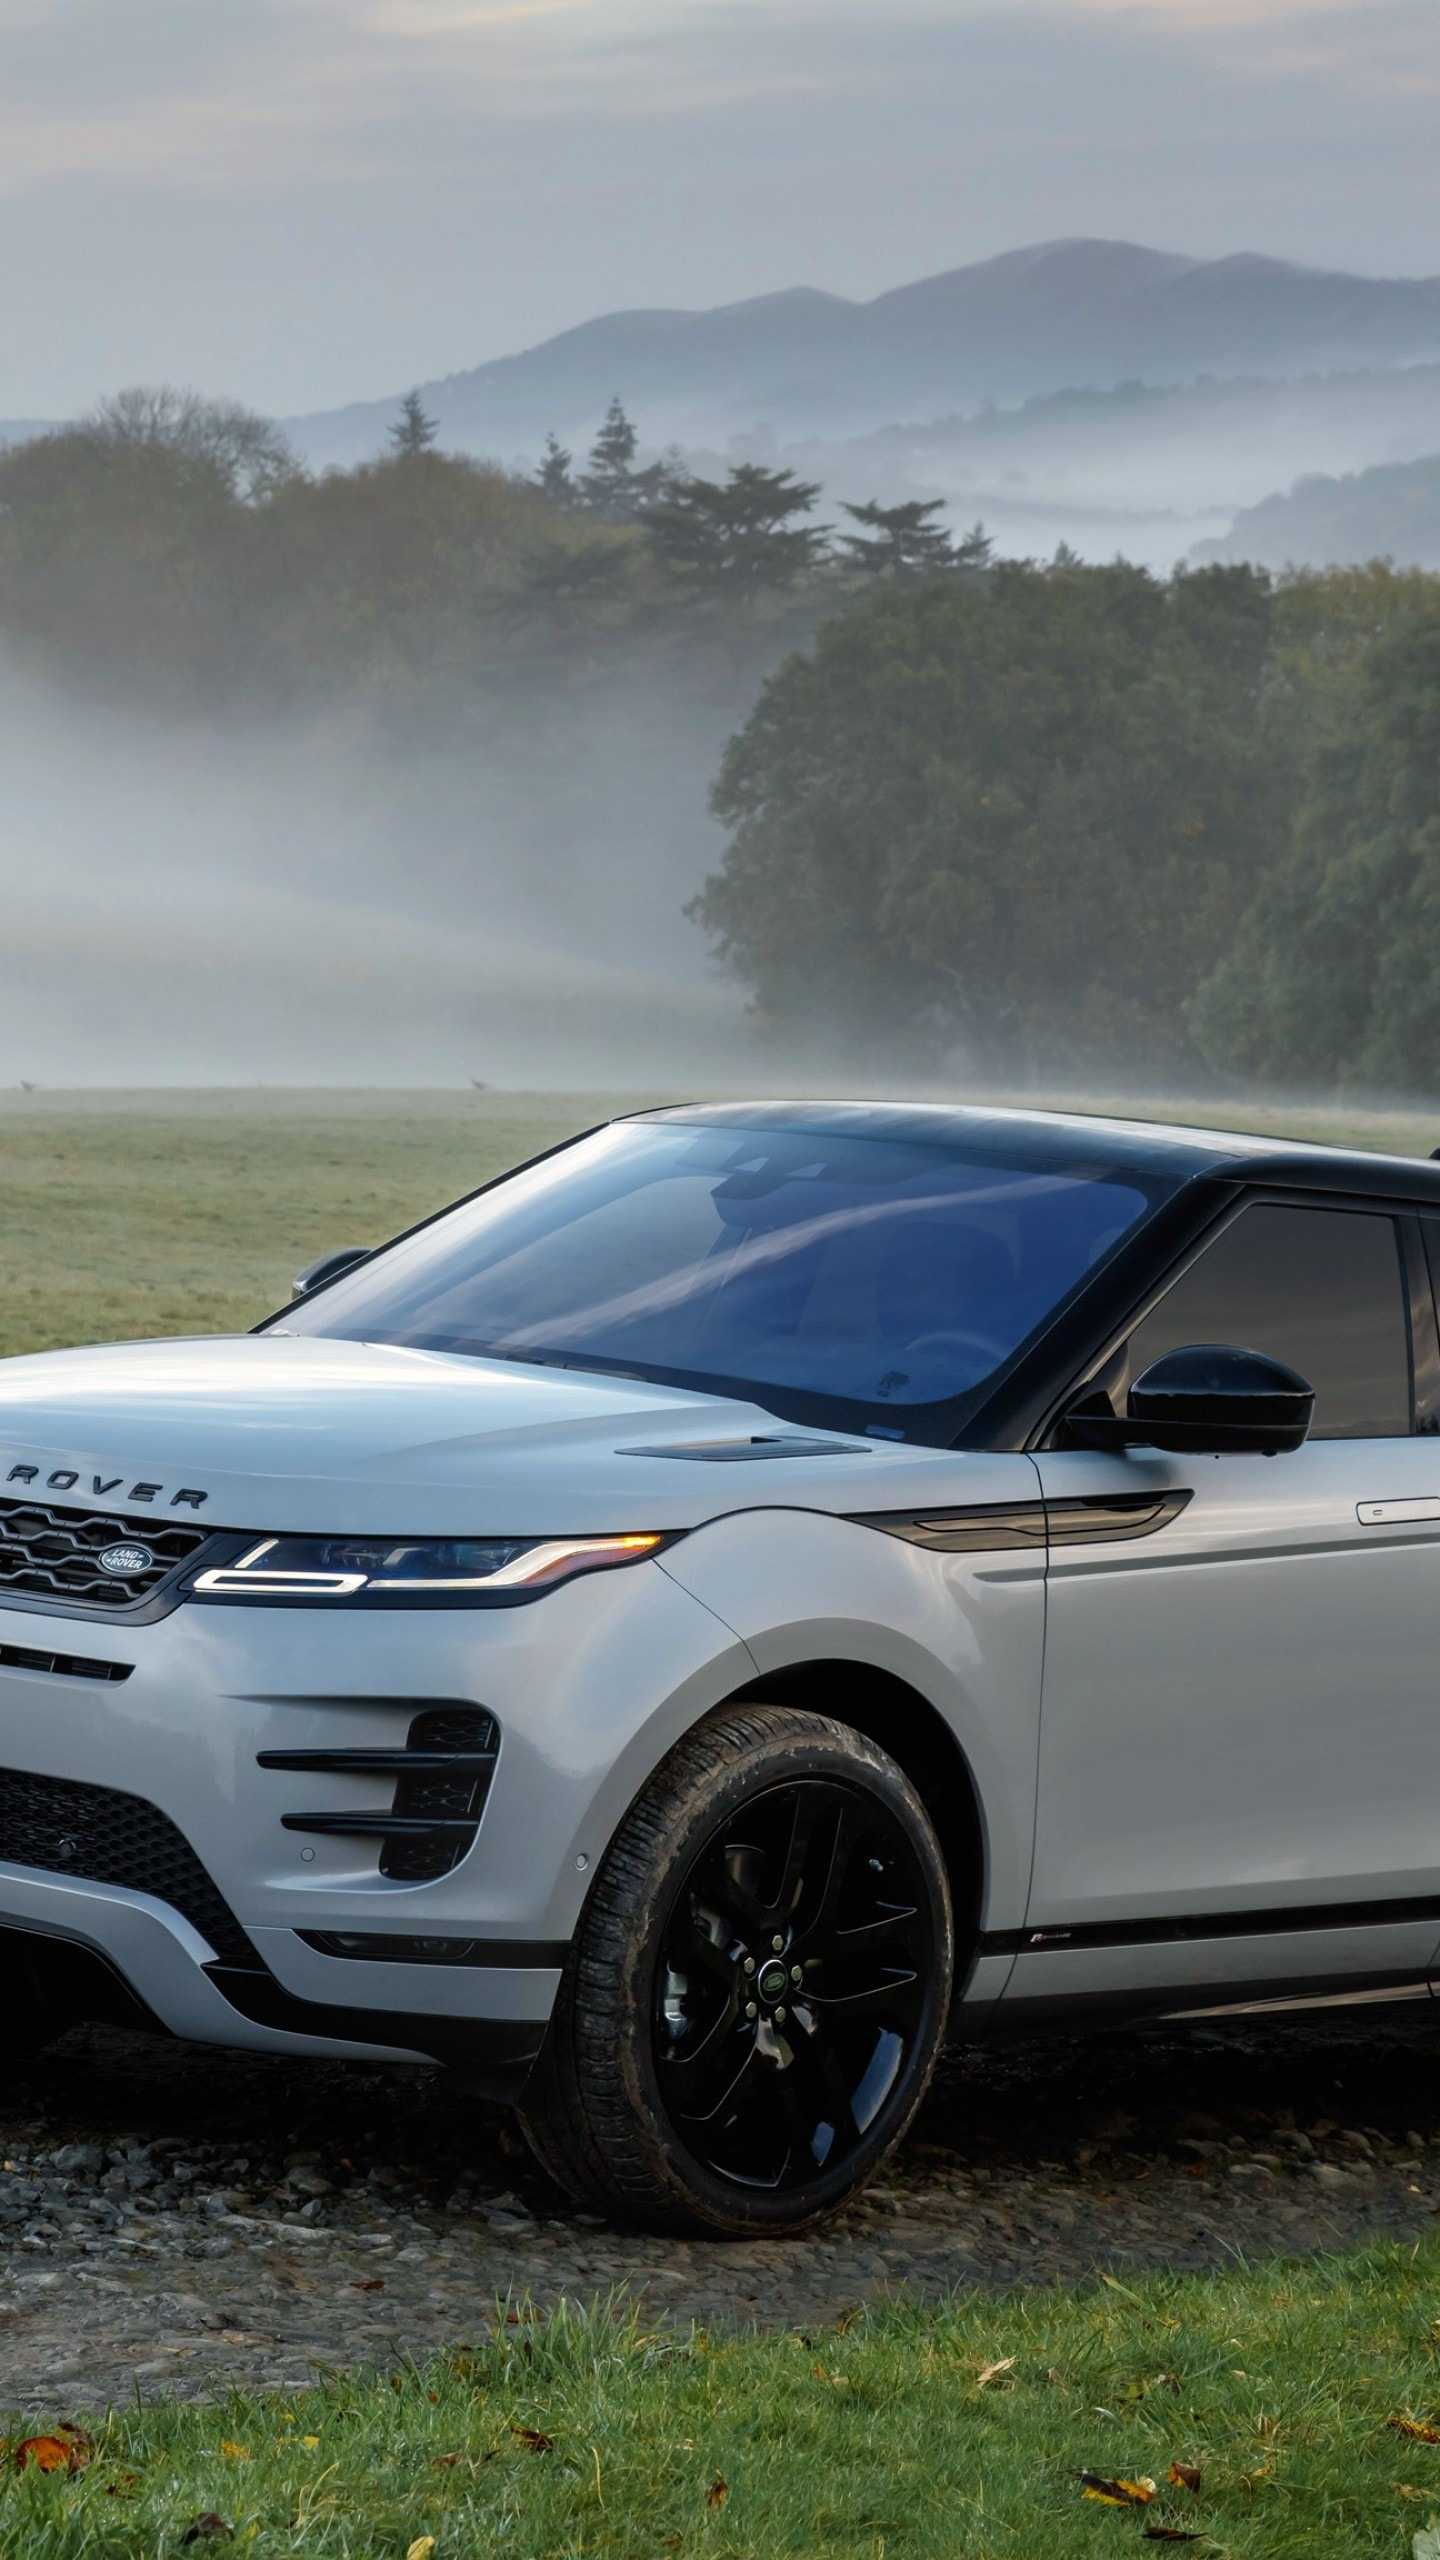 Range Rover Evoque Wallpaper iPhone - KoLPaPer - Awesome Free HD Wallpapers